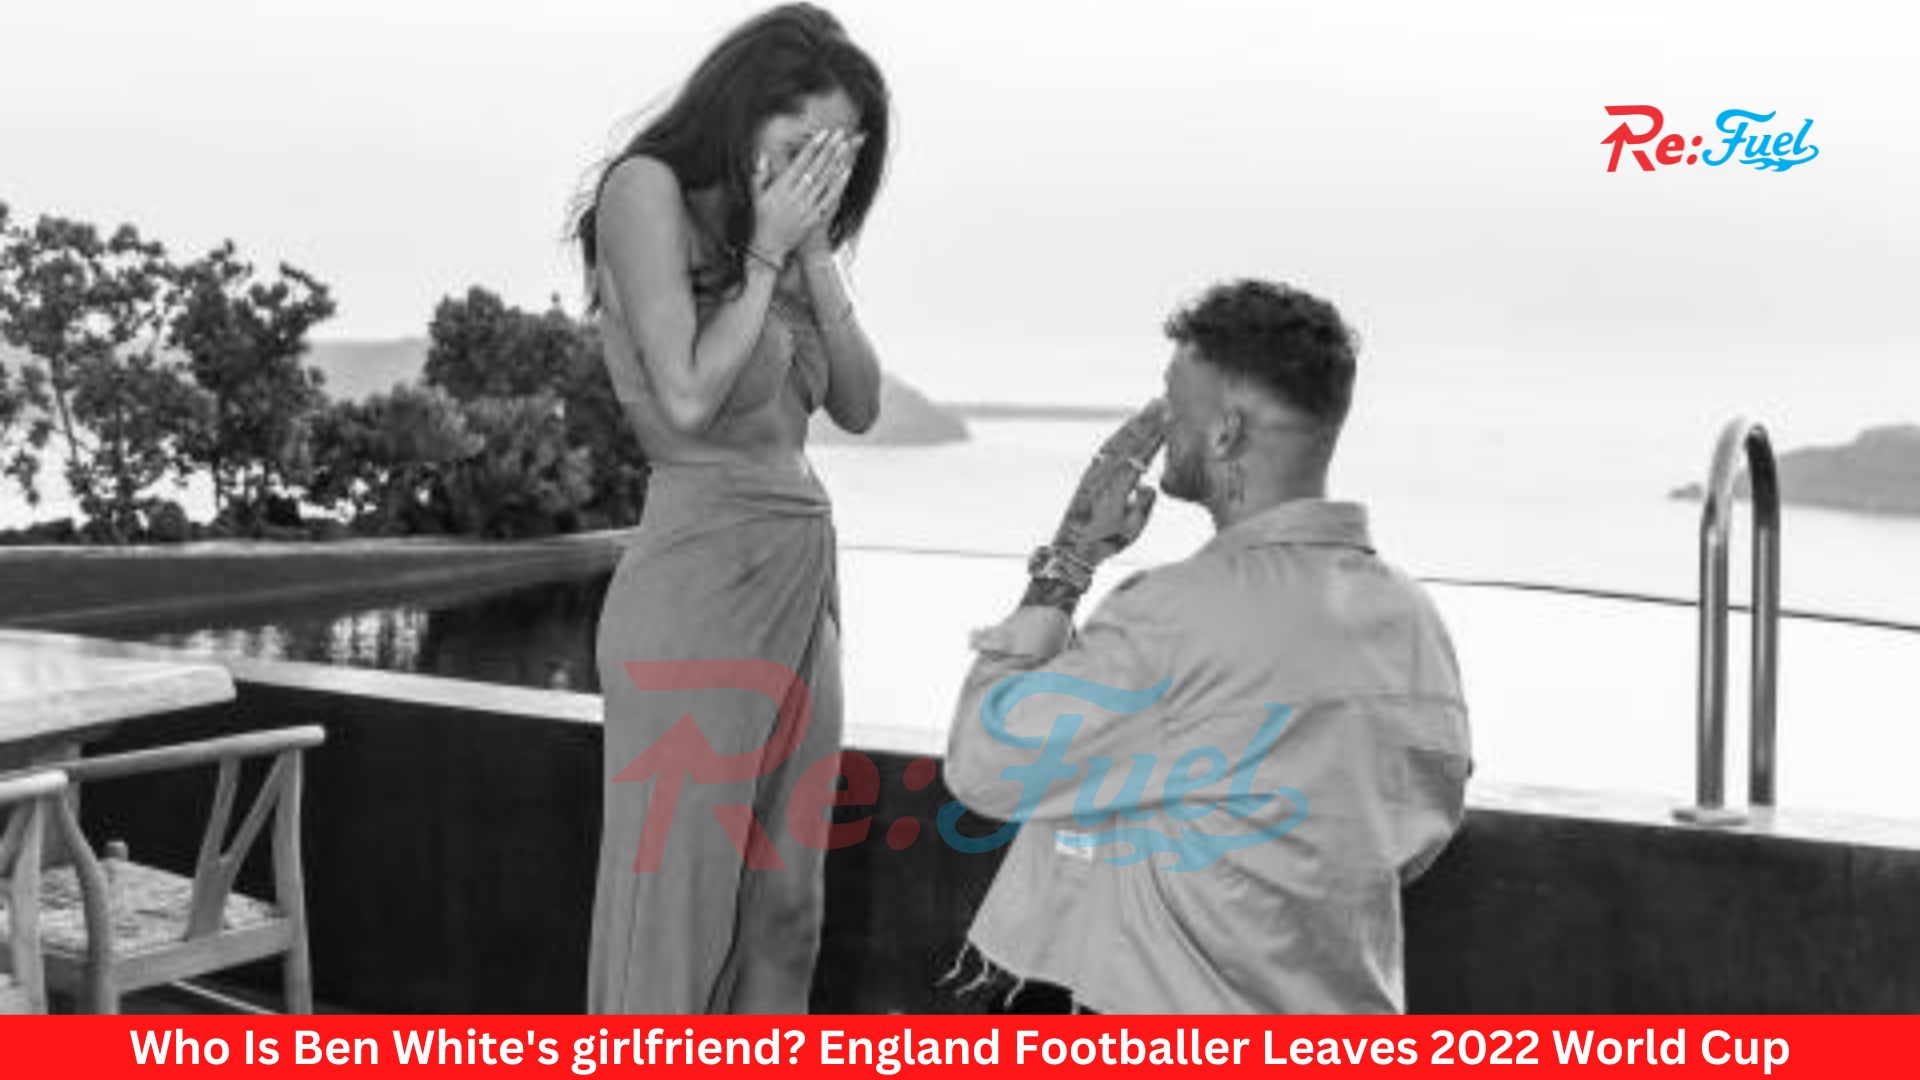 Who Is Ben White's girlfriend? England Footballer Leaves 2022 World Cup For "Personal Reasons"